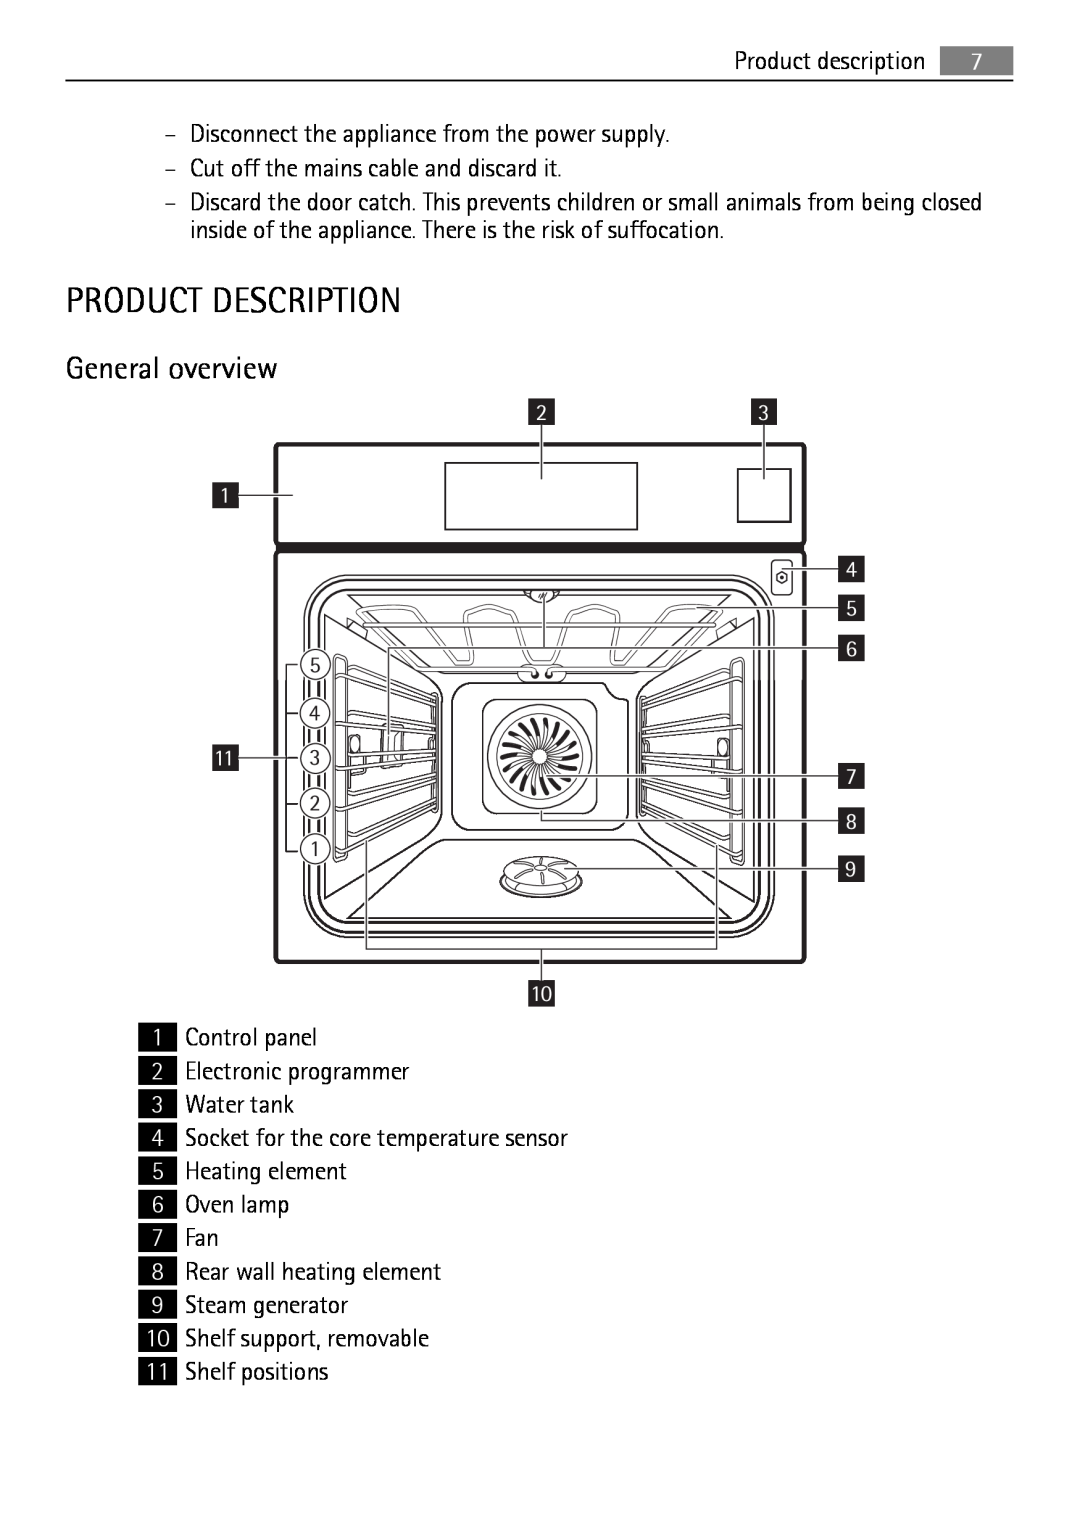 AEG BS7304001 user manual Product Description, General overview 